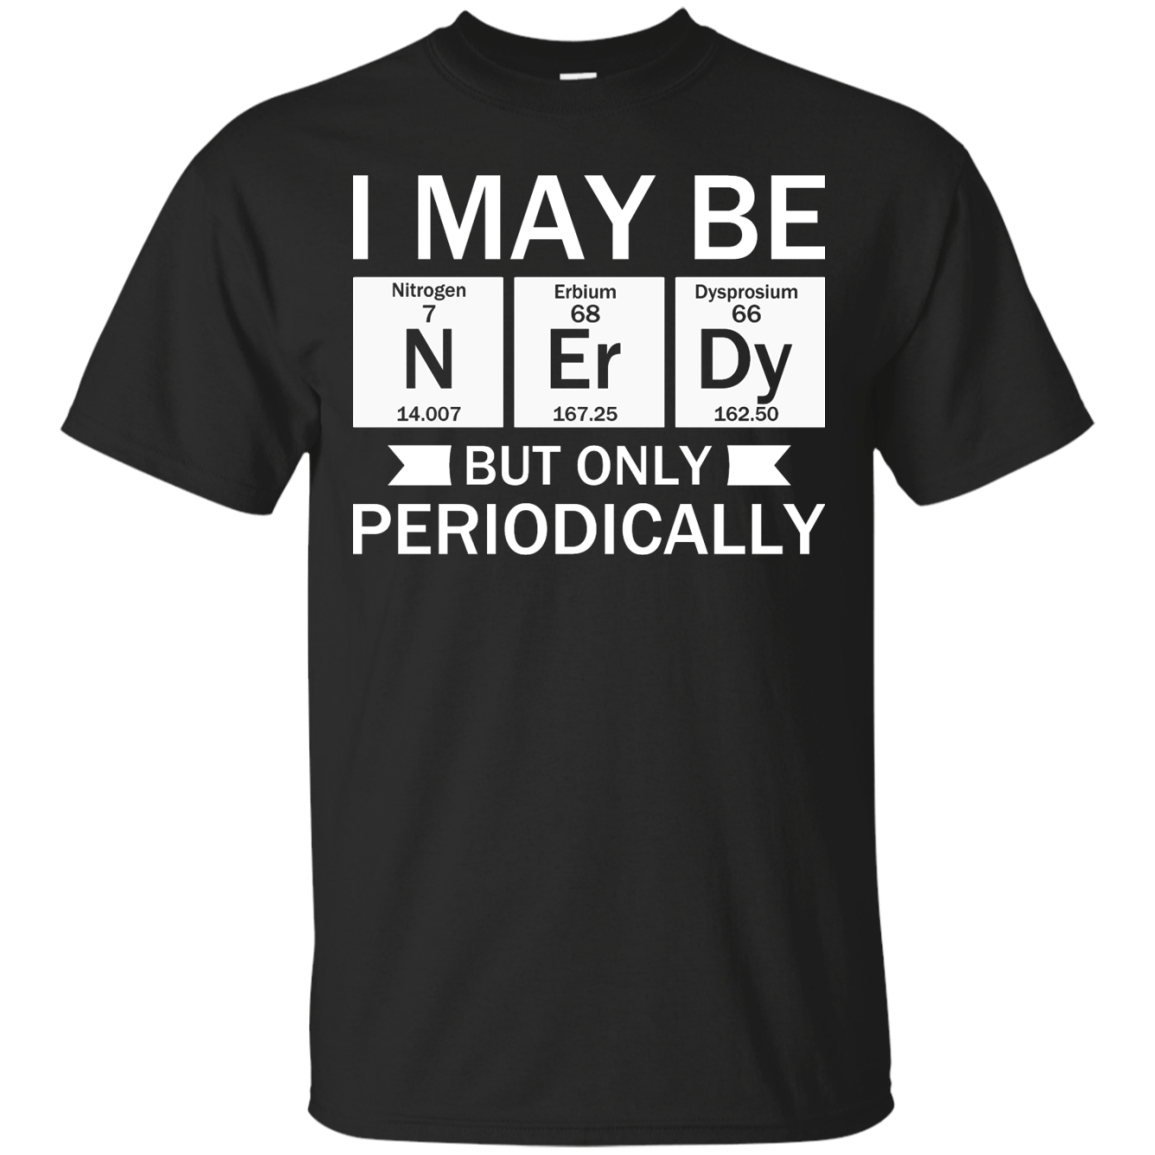 I May Be Nerdy But Only Periodically | Funny T-shirts | Engineering ...